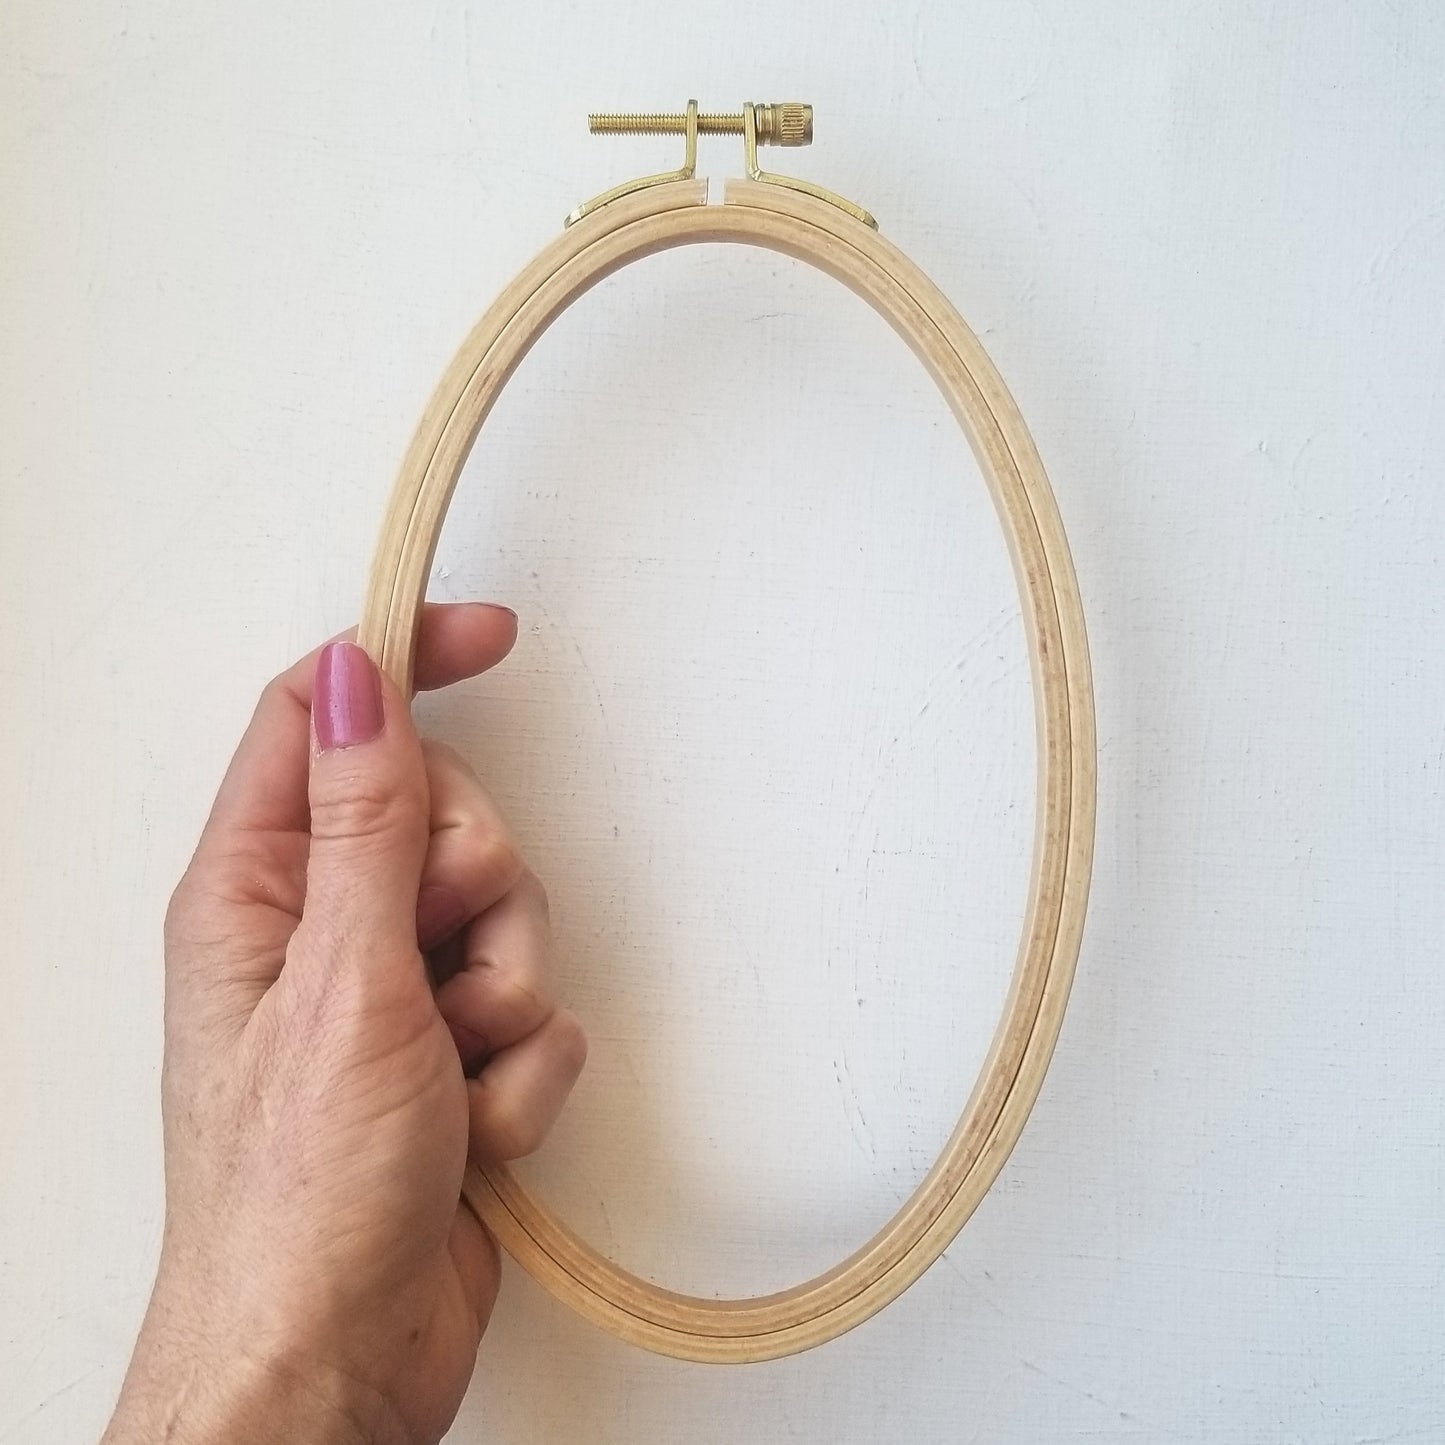 4 Inch Embroidery Hoop only £4.50